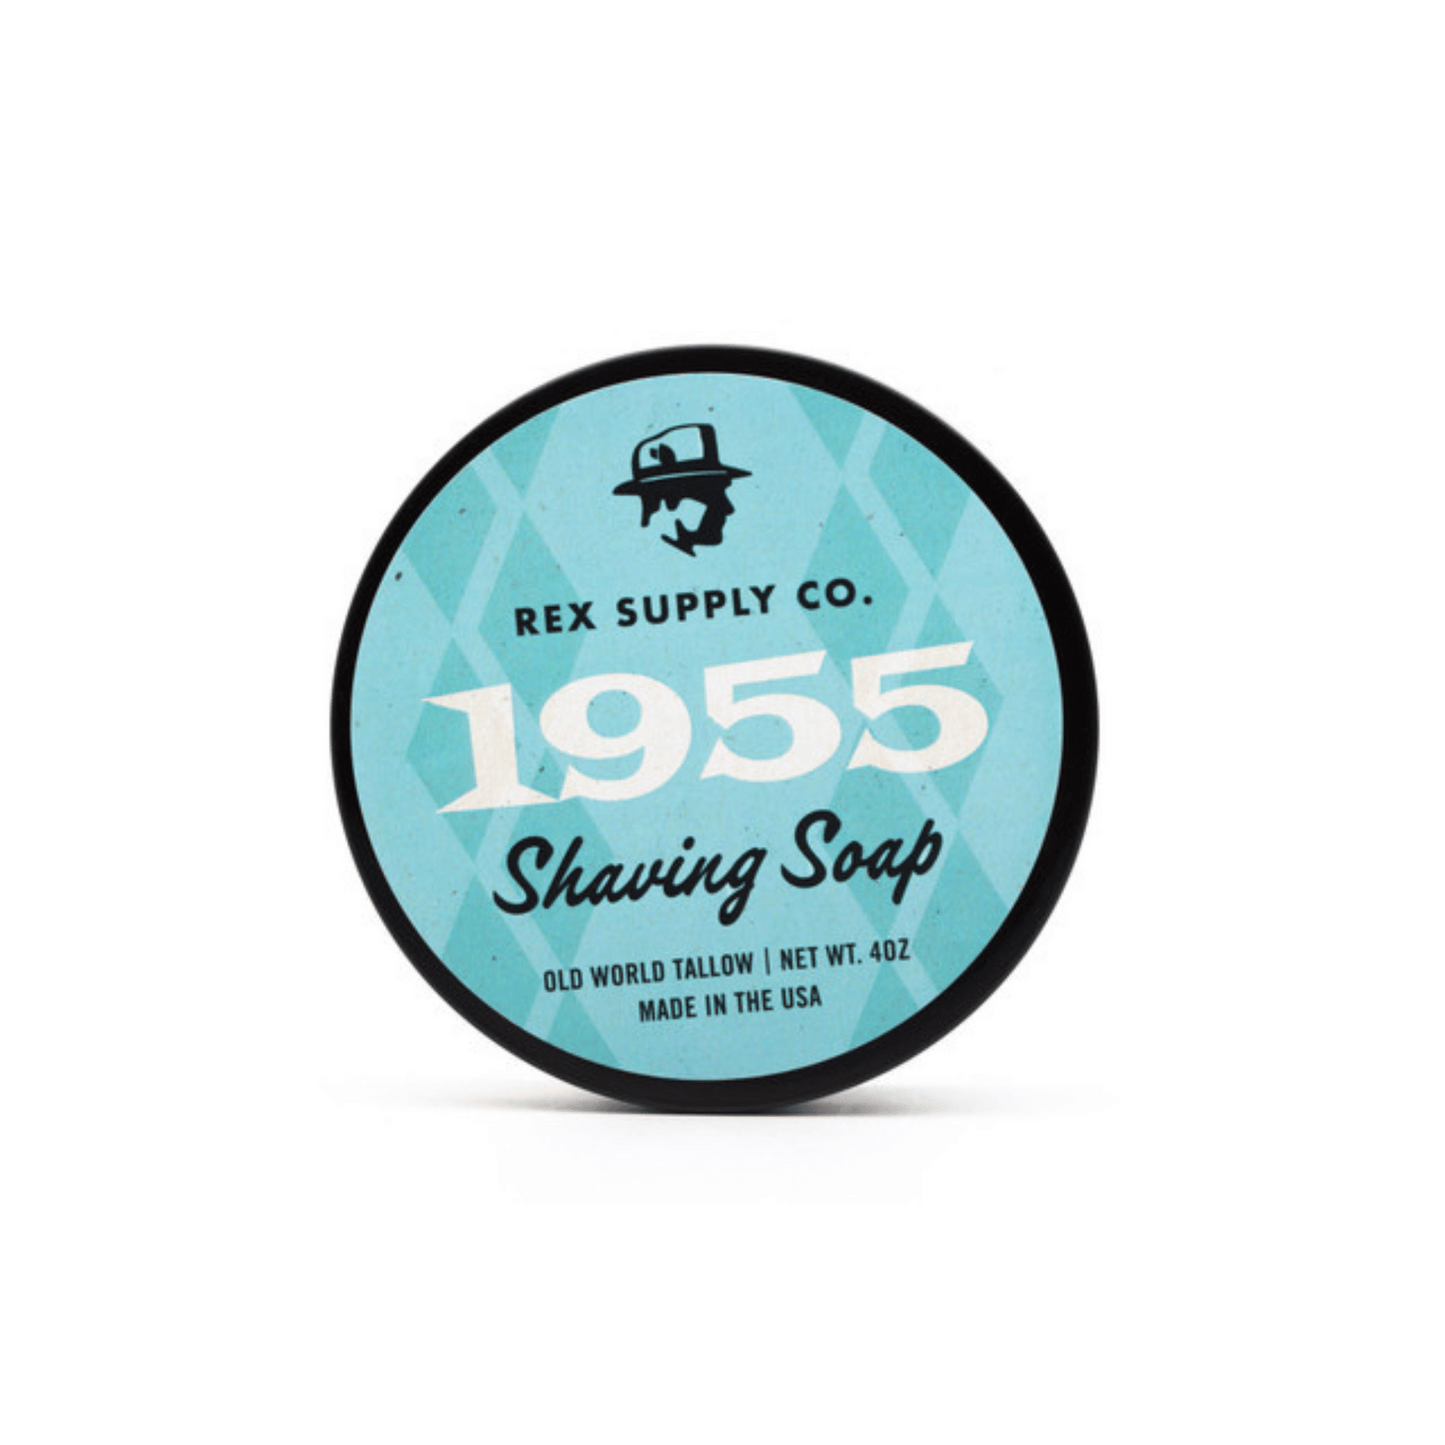 Primary Image of Shaving Soap - 1955